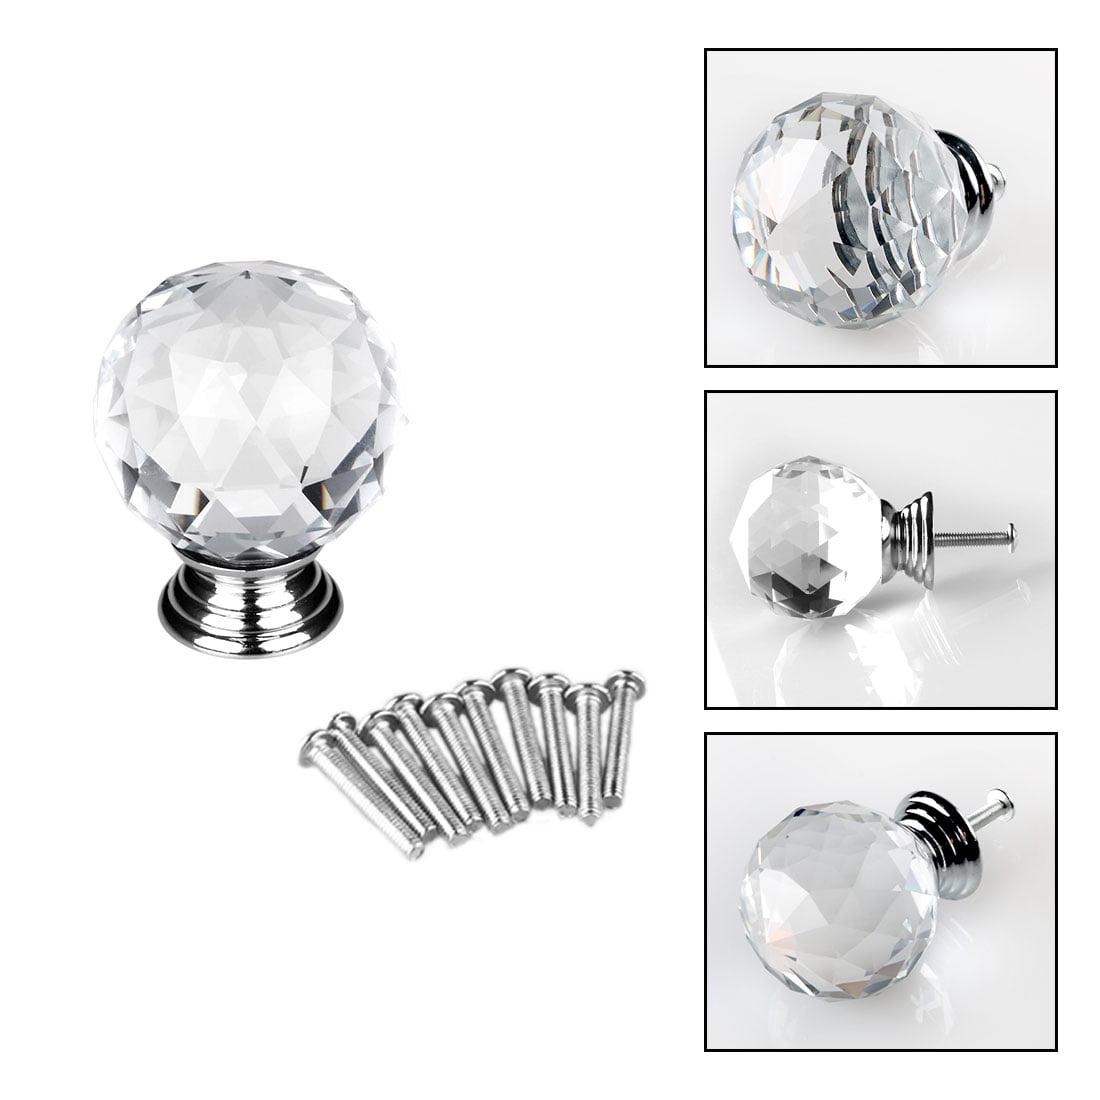 Funitsv Crystal Drawer Knobs Pulls Cabinet Handle 30mm Single Hole for Dresser Drawers,Kitchen Cabinets,Bathroom Cabinet and Door Knobs 12 PCS Glass Cabinet Knobs 12